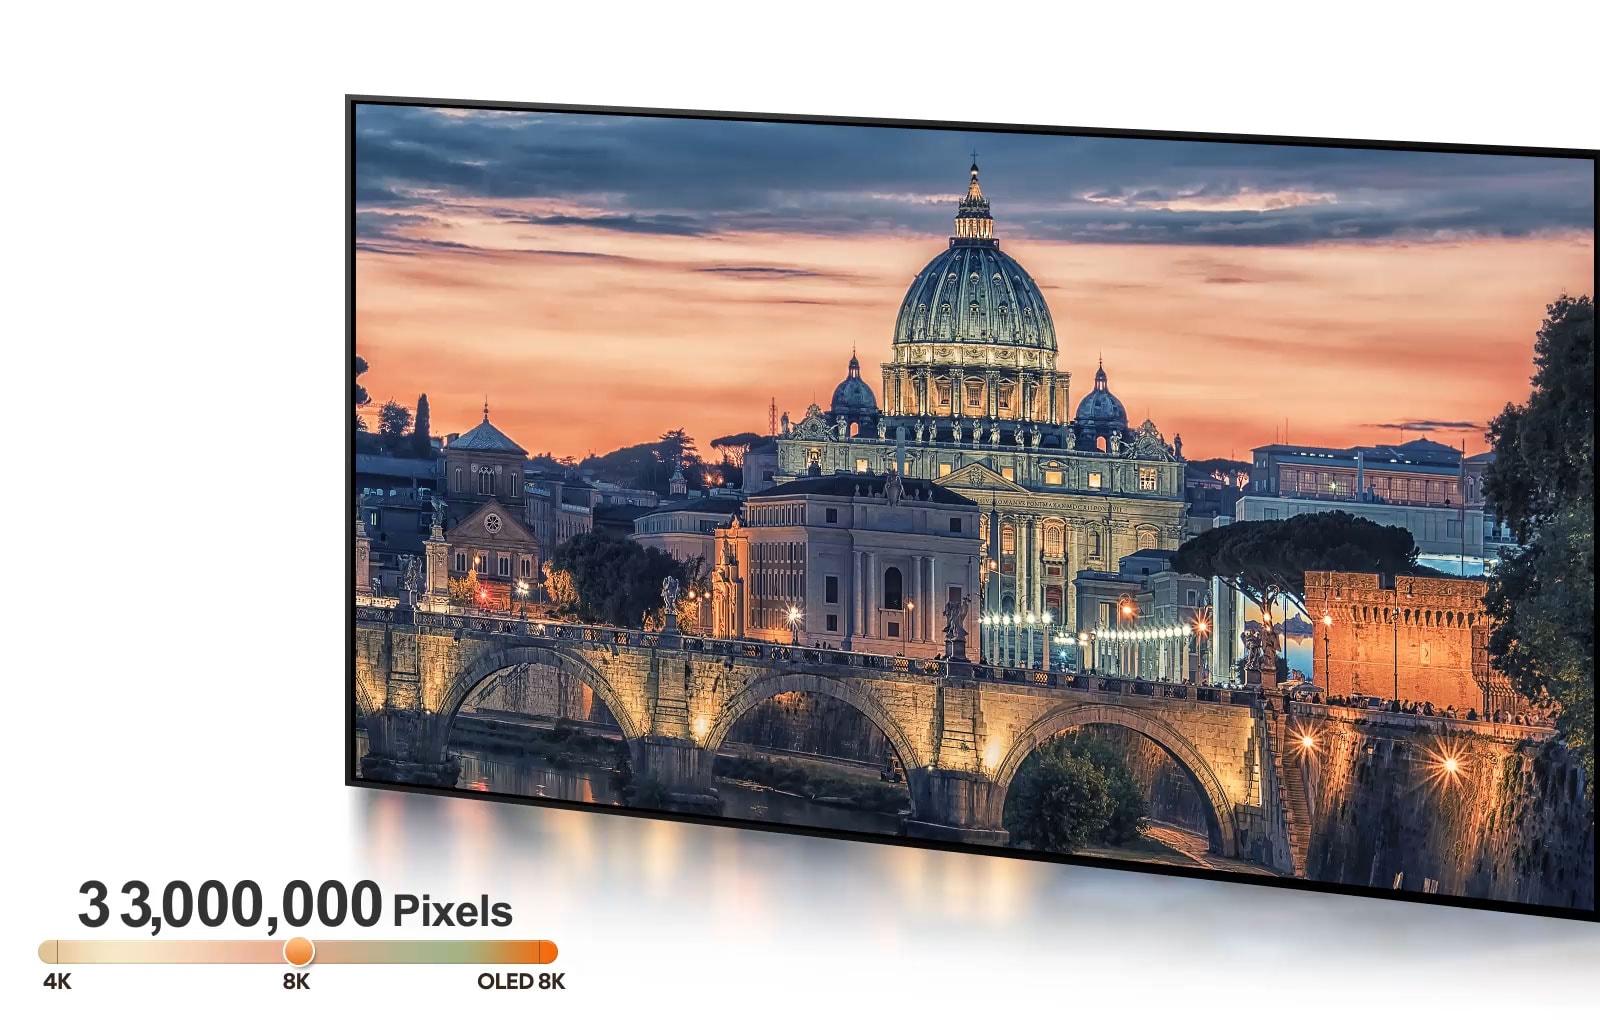 A TV screen capturing the scenery of St. Peter’s Square(play the video)